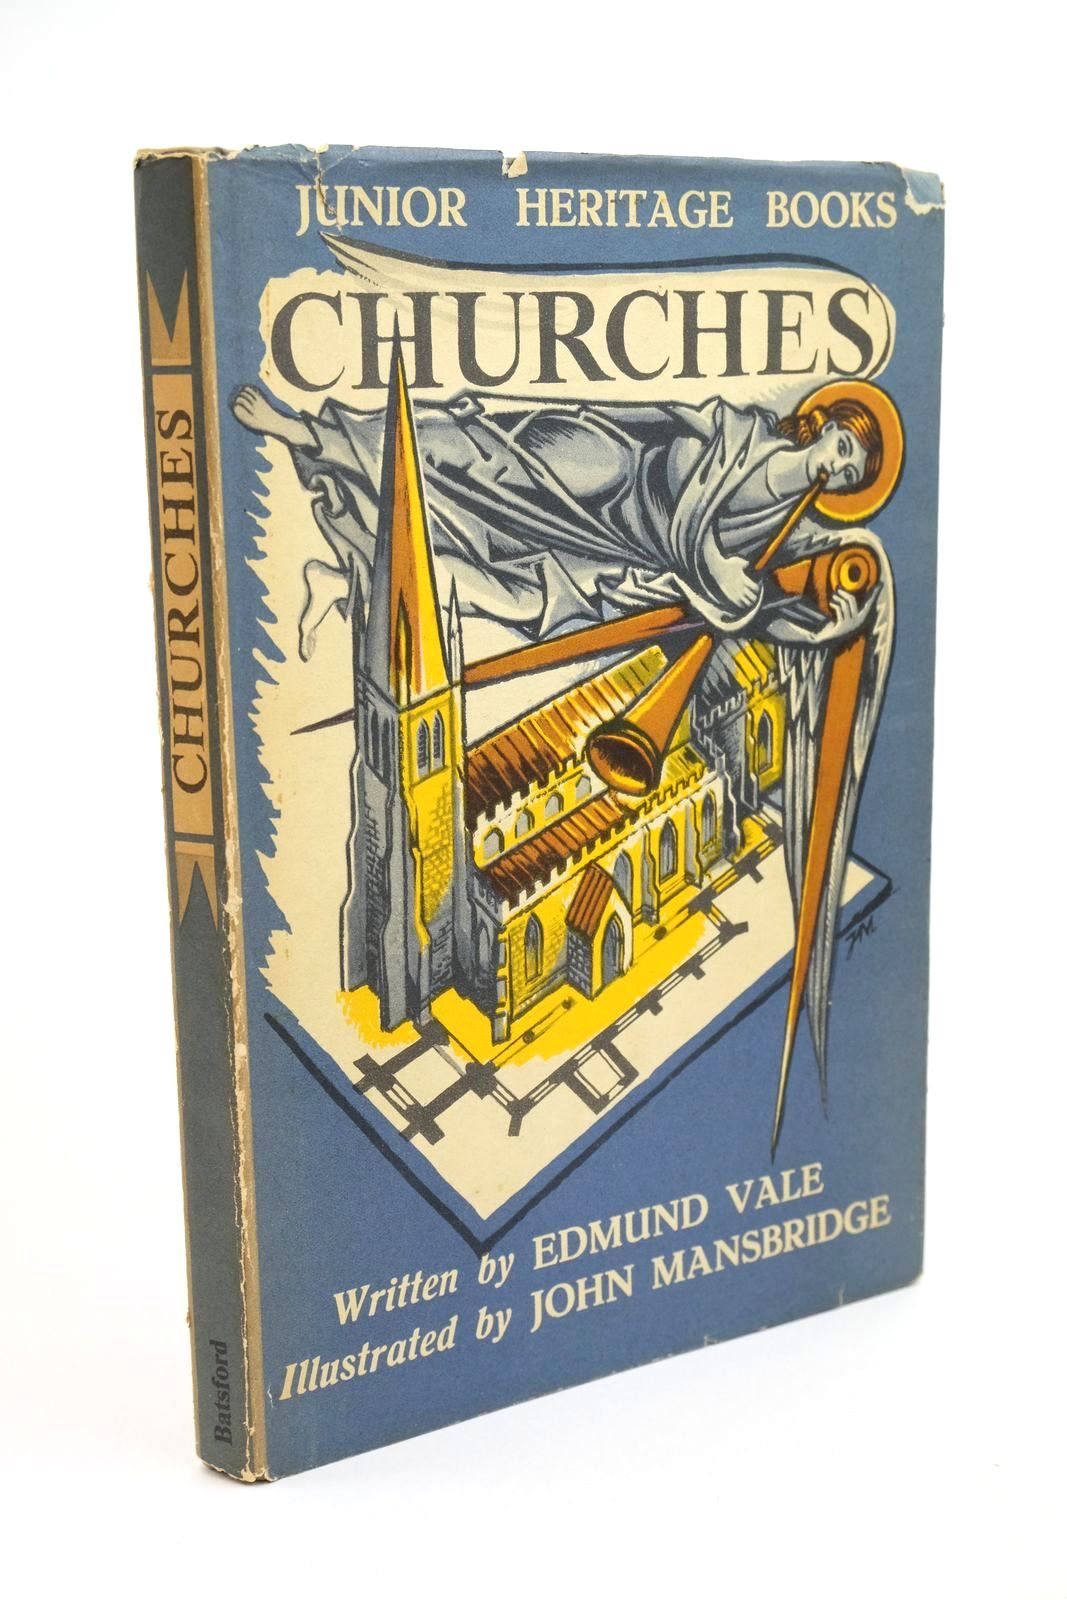 Photo of CHURCHES written by Vale, Edmund illustrated by Mansbridge, John published by B.T. Batsford Ltd. (STOCK CODE: 1323243)  for sale by Stella & Rose's Books